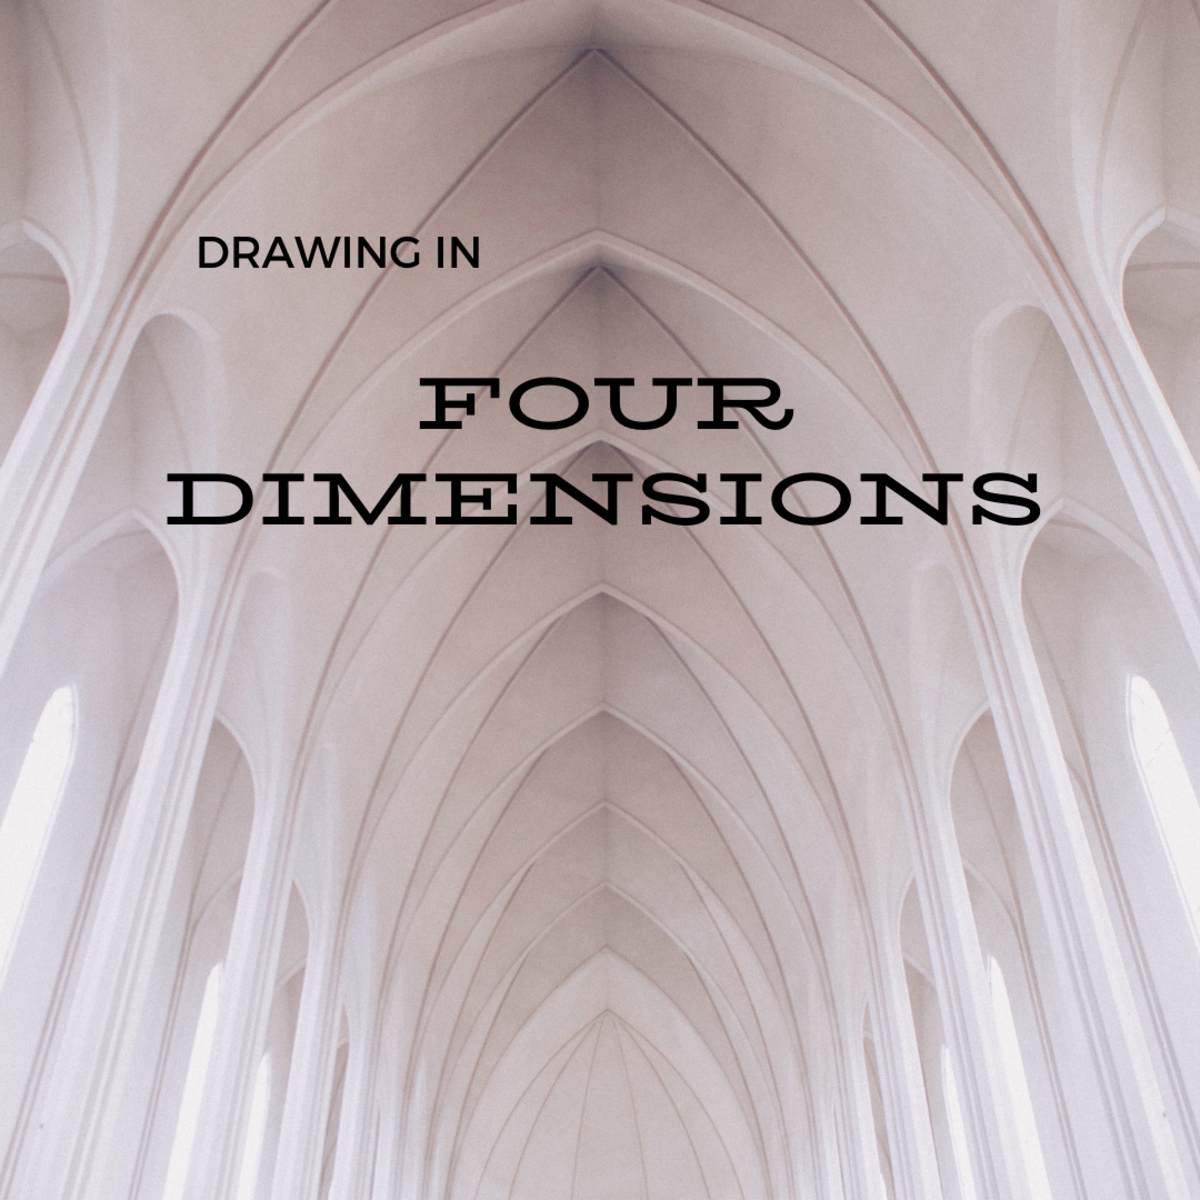 How to Draw Four Dimensional Figures